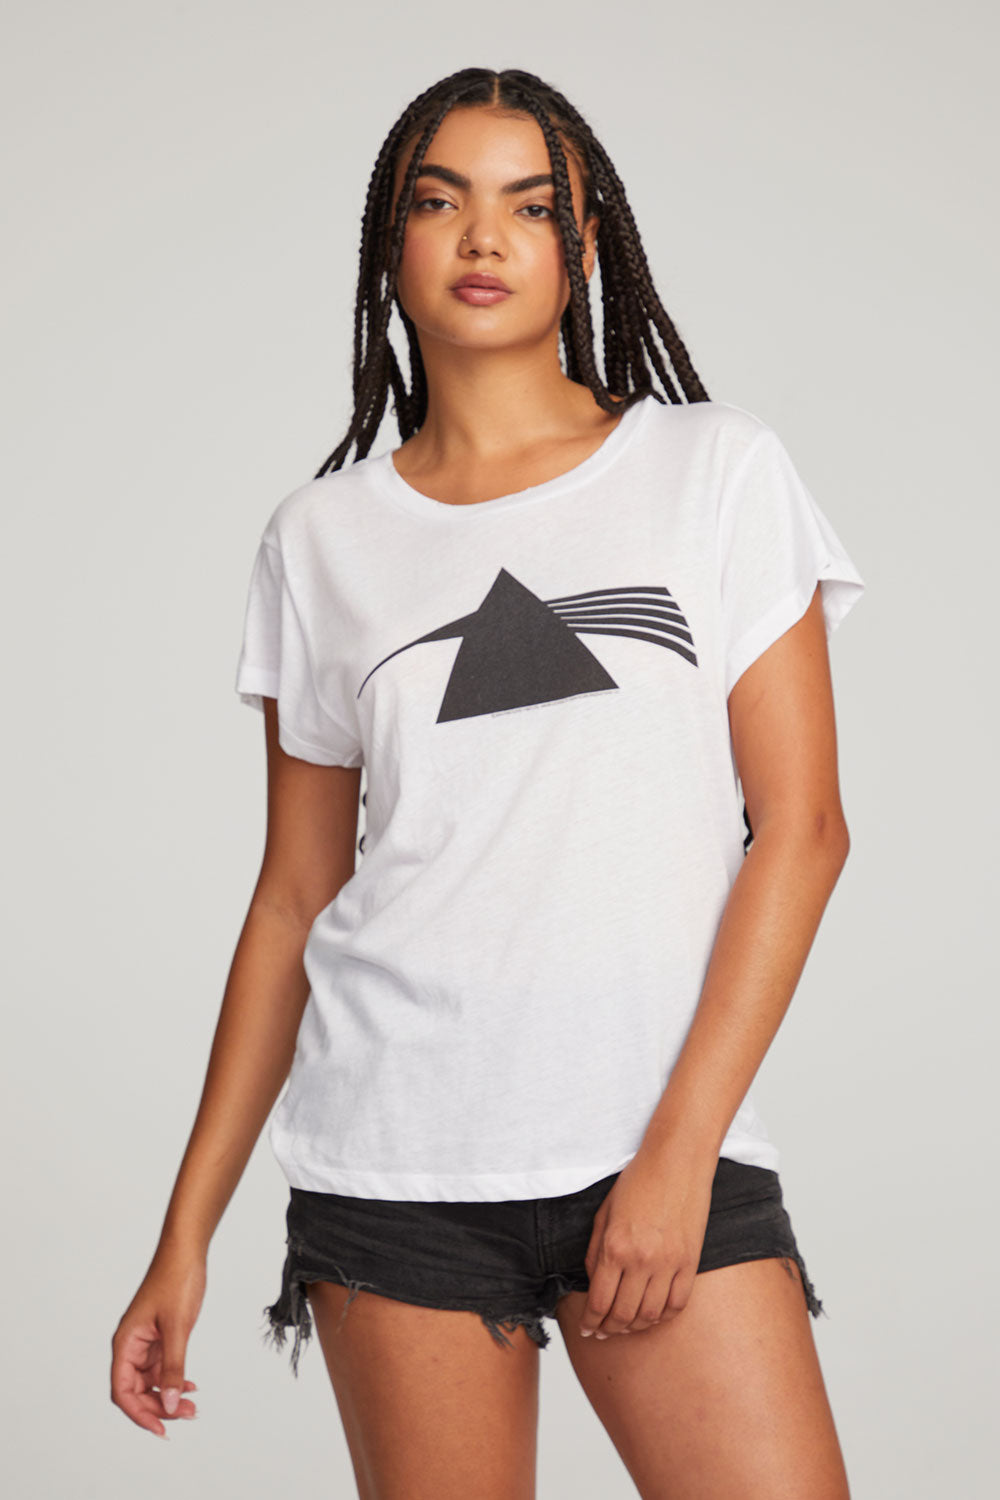 Pink Floyd Dark Side Of The Moon Tee WOMENS chaserbrand